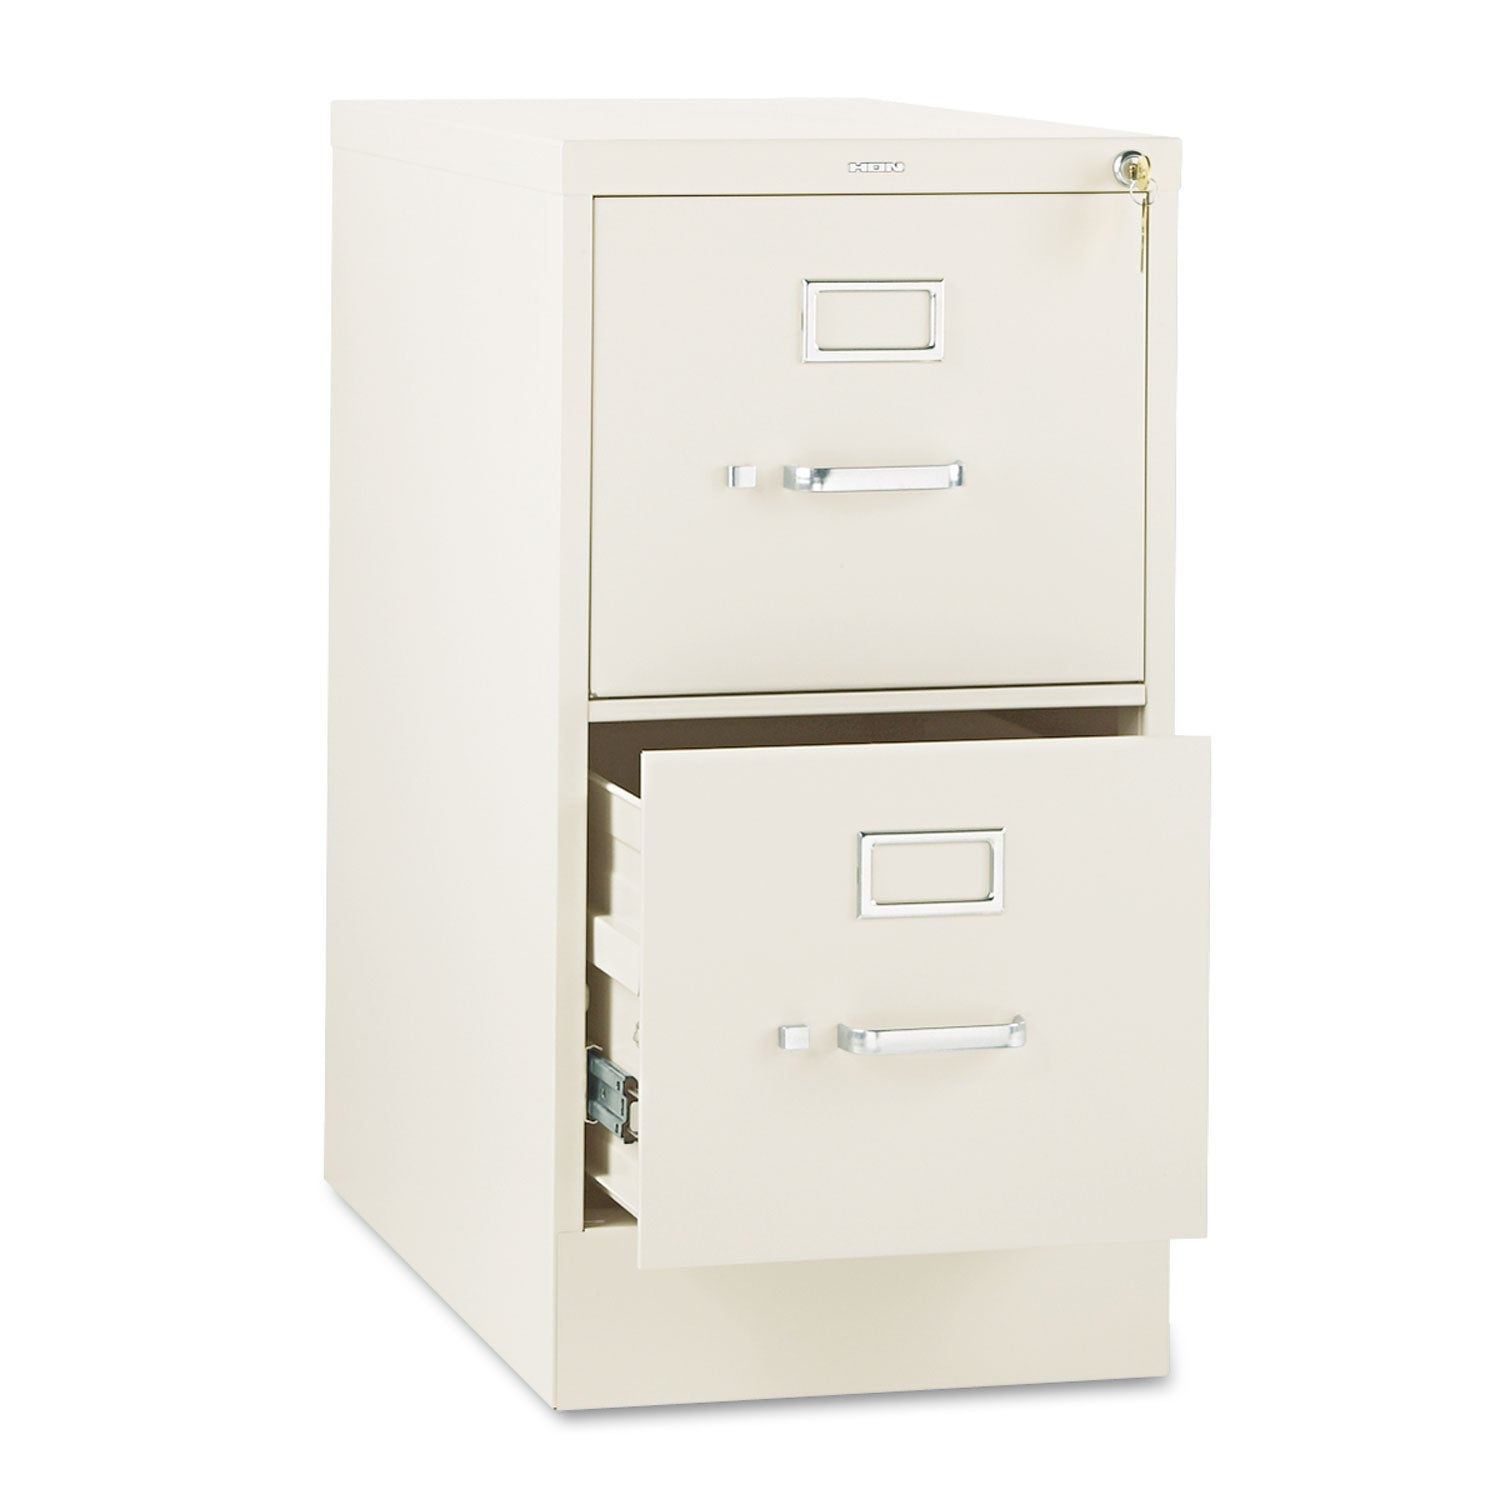 310 Series Vertical File, 2 Letter-Size File Drawers, Putty, 15" x 26.5" x 29 - 